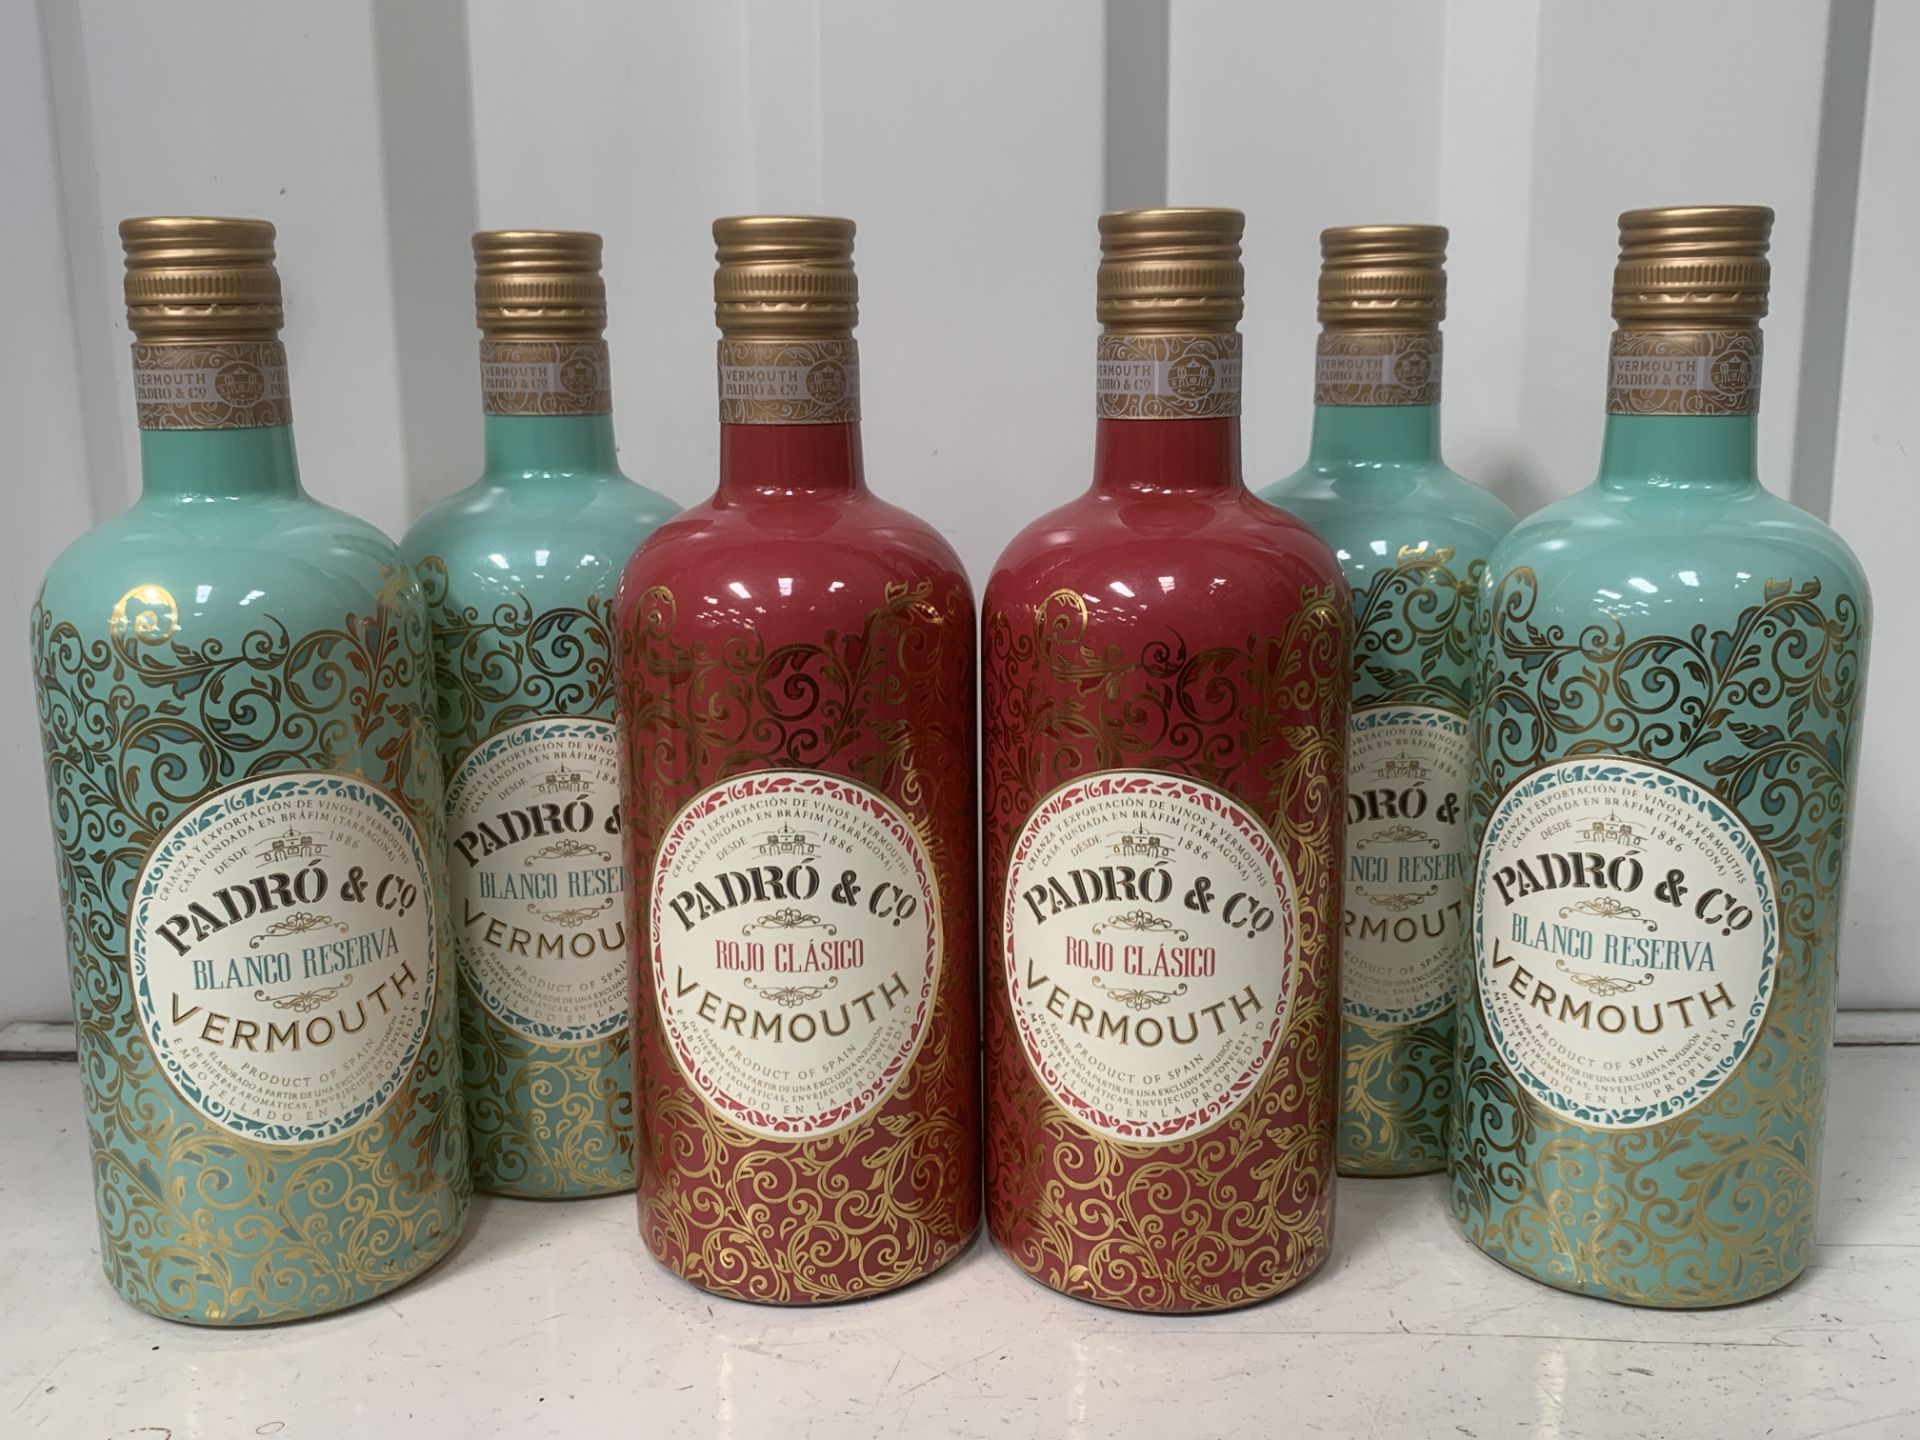 6x Padro & Co. Bottles of Vermouth; 4x Blanco Reserva 18%, 75cl and 2x Rojo Clasico 18%, 75cl